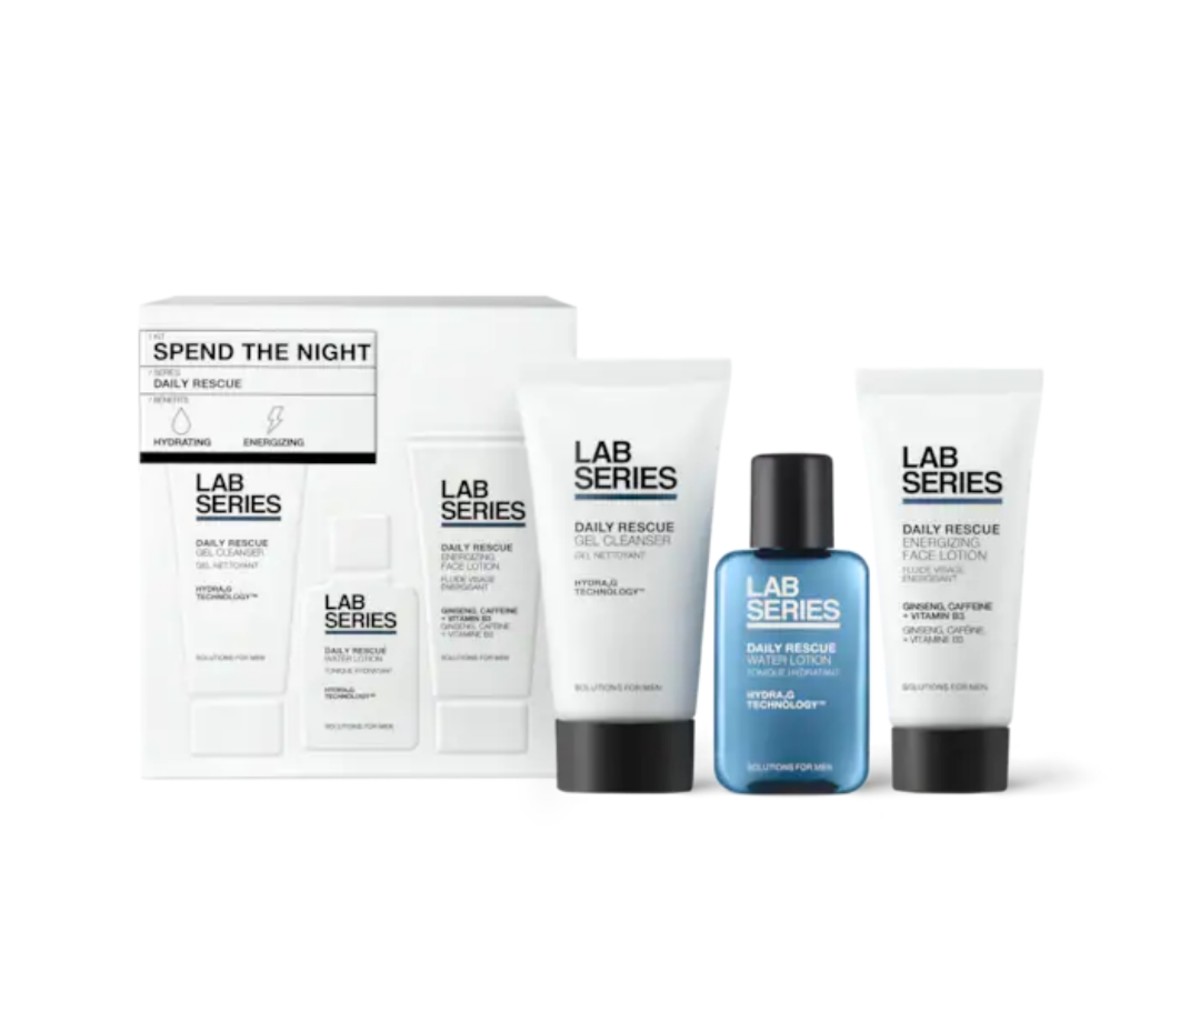 Lab Series Spend the Night Daily Rescue Minis